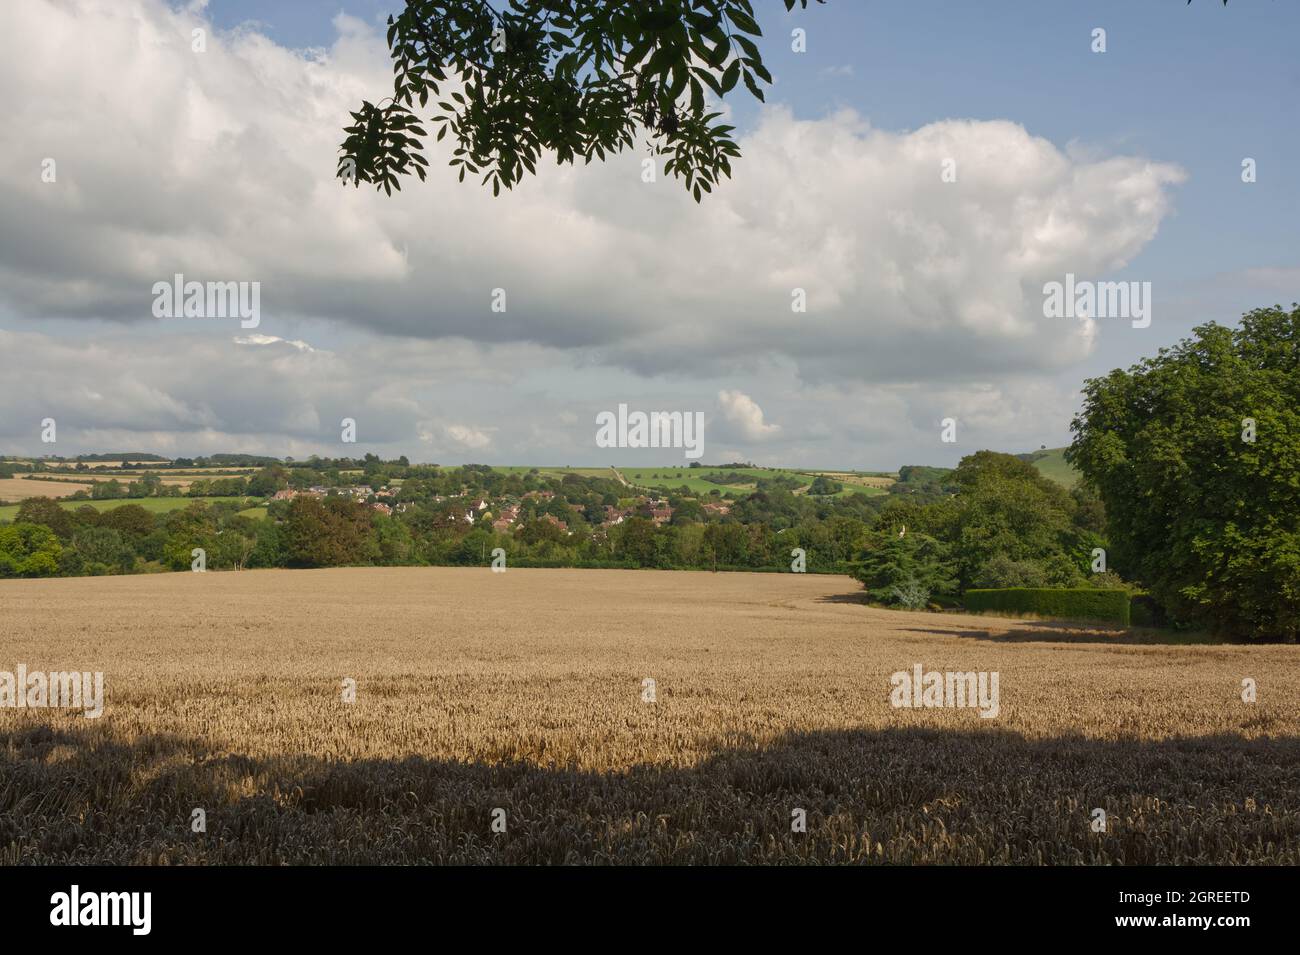 Countryside at Findon on the South Downs near Worthing, West Sussex, England. With ripe barley field and village. Stock Photo